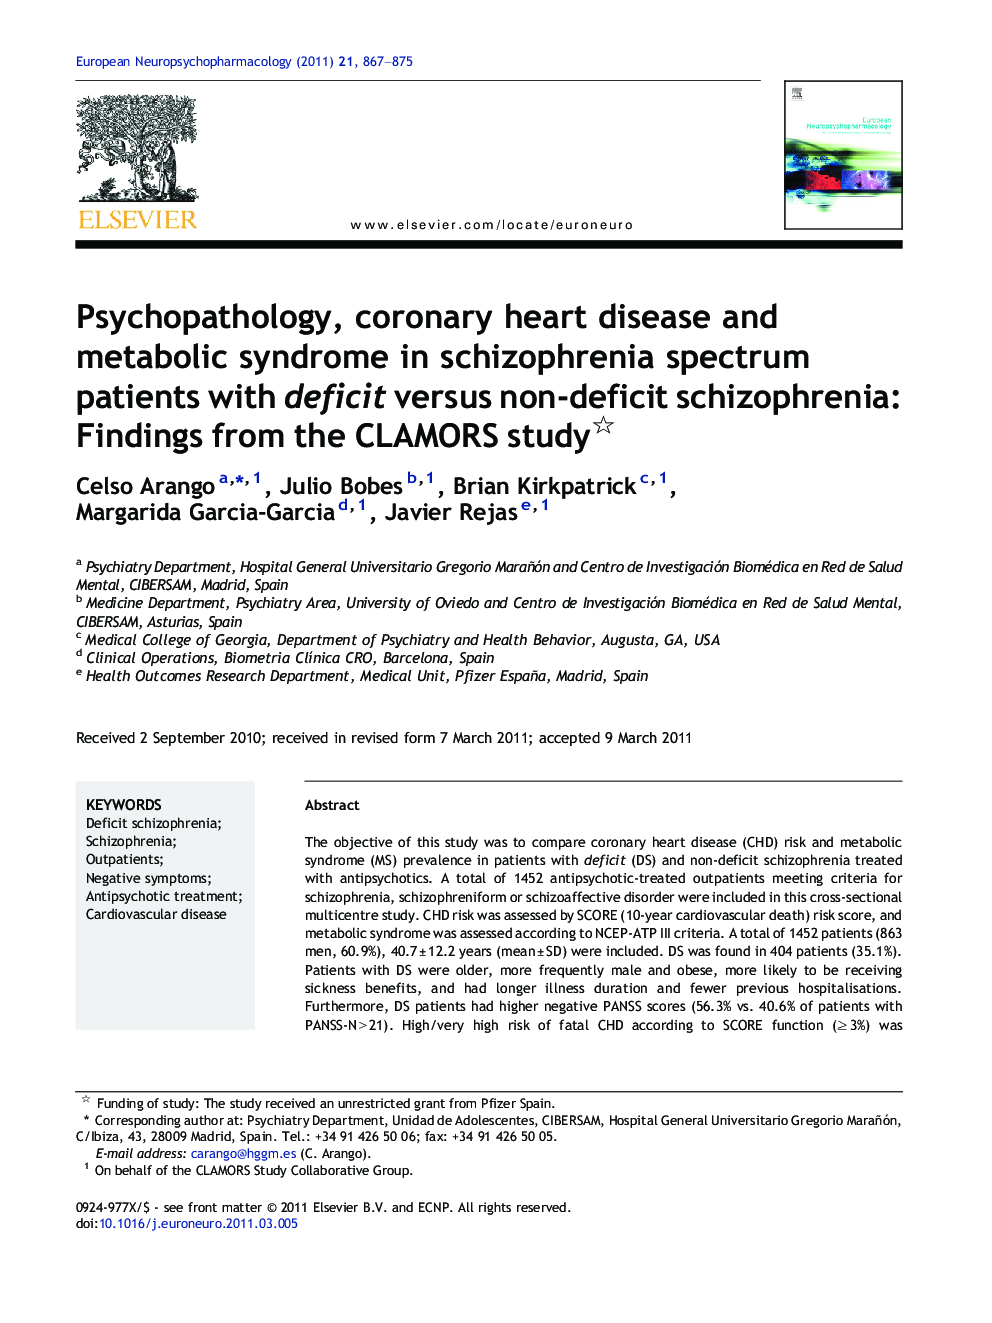 Psychopathology, coronary heart disease and metabolic syndrome in schizophrenia spectrum patients with deficit versus non-deficit schizophrenia: Findings from the CLAMORS study 